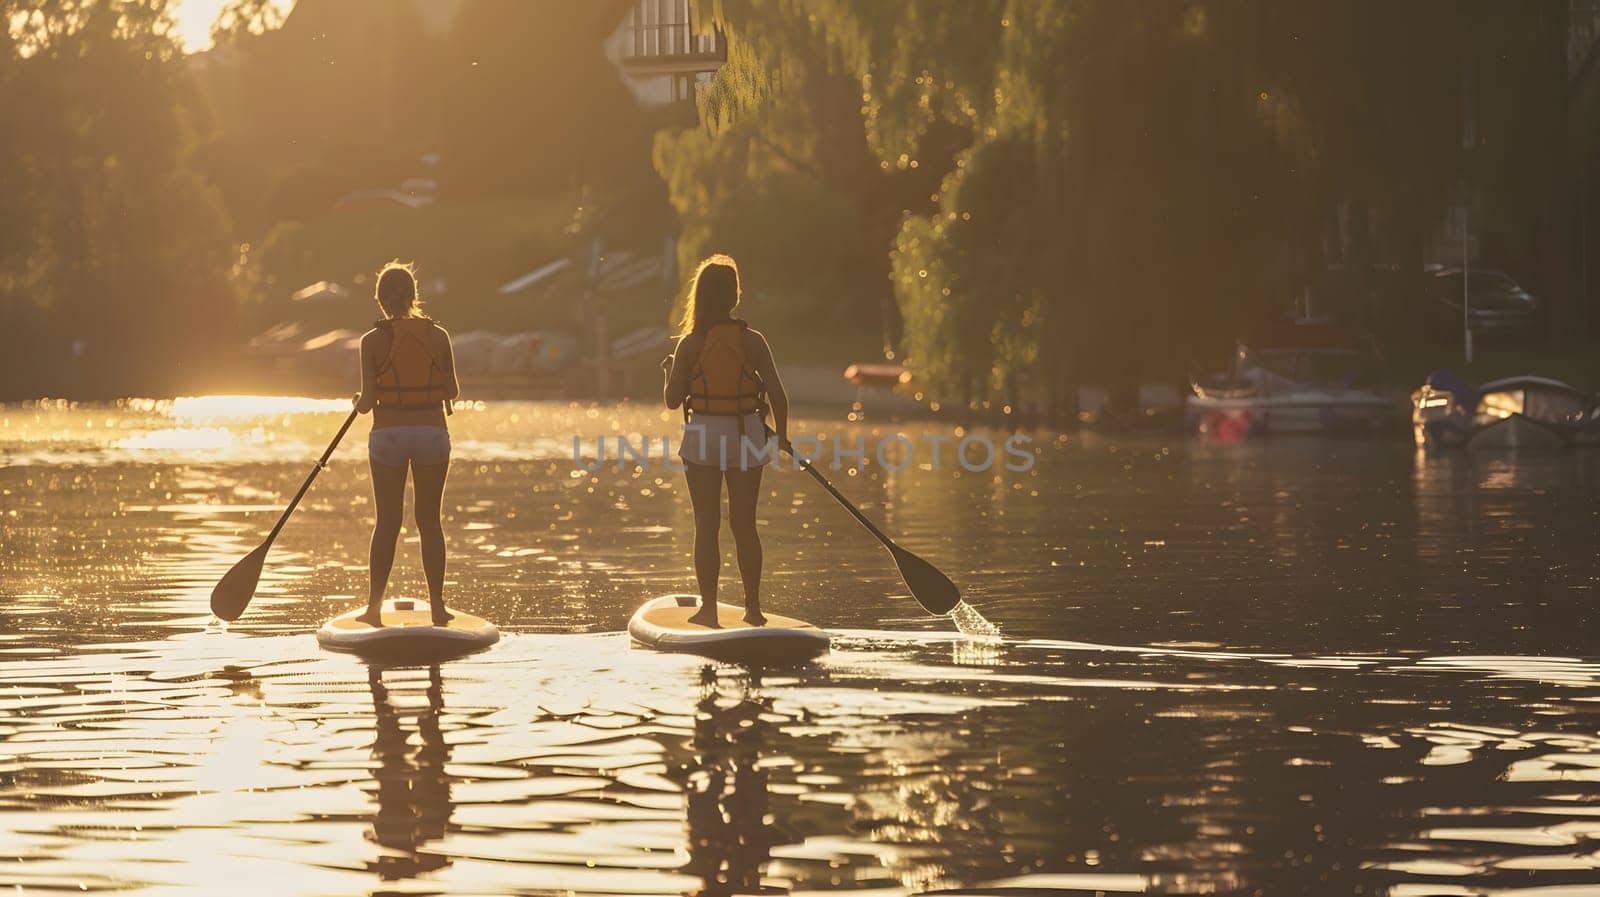 Two women paddle boarding on a peaceful lake surrounded by a stunning natural landscape of trees and water at sunset, enjoying leisure and recreation in the great outdoors